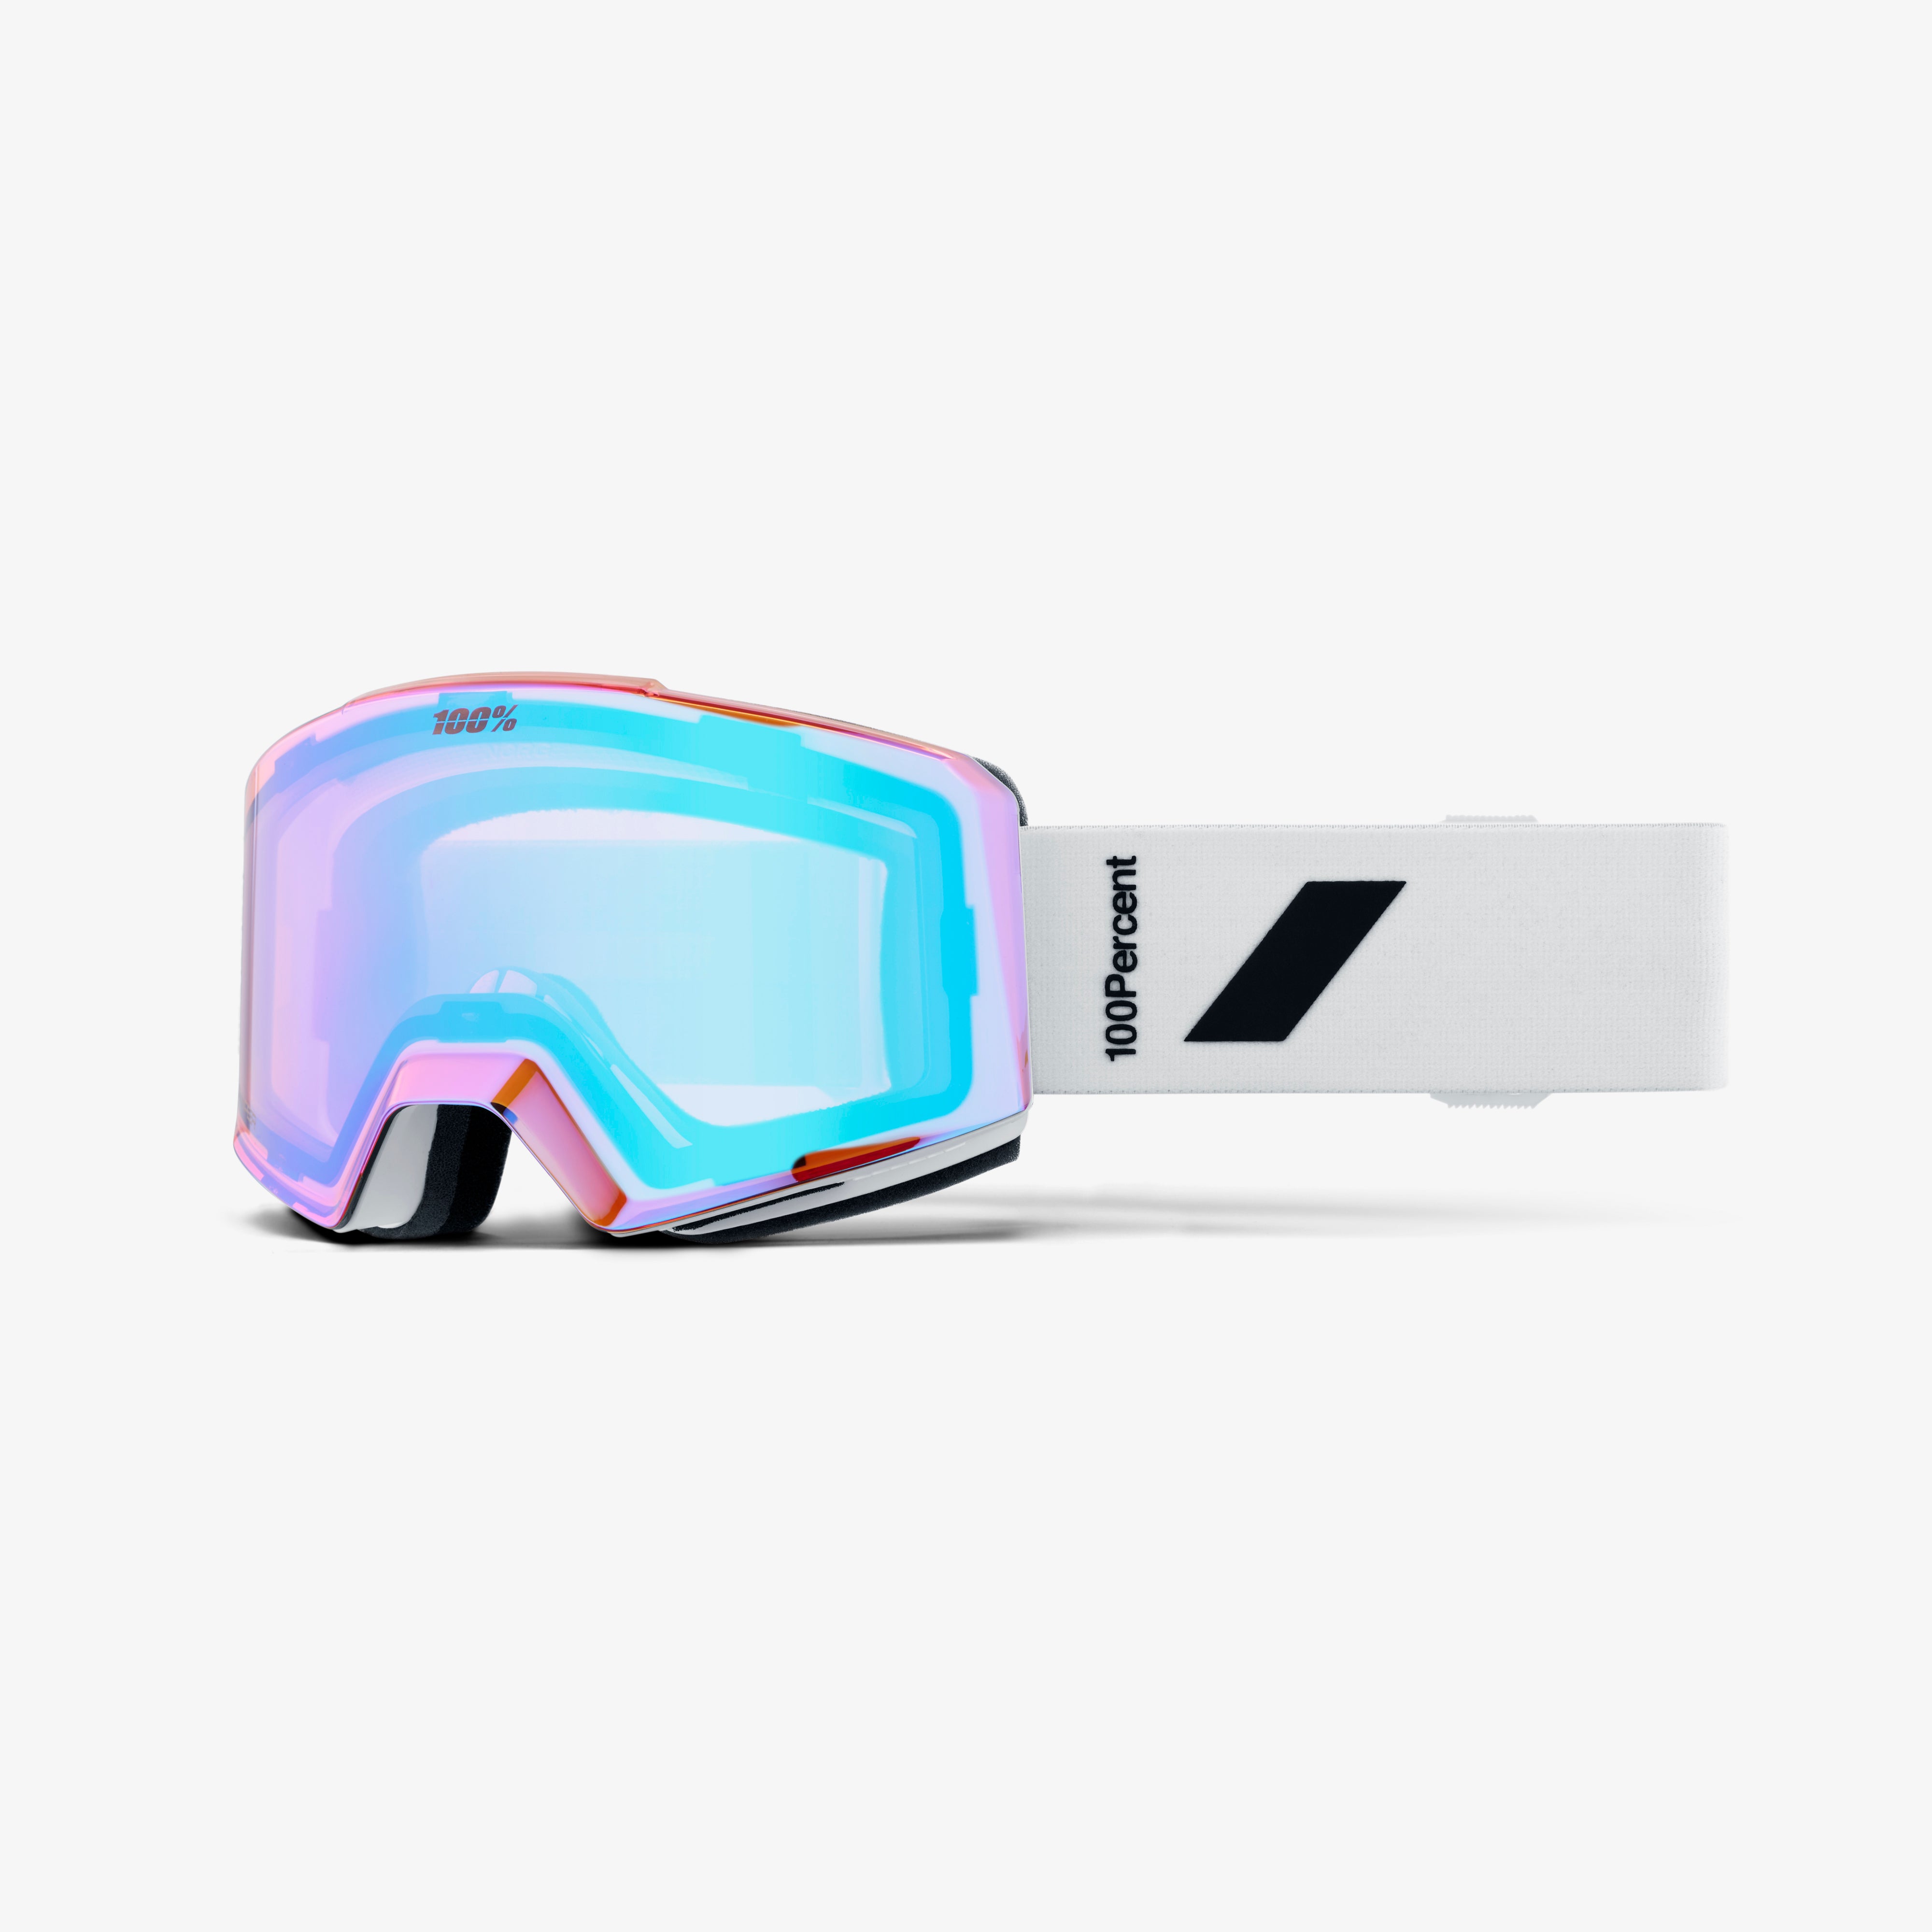 NORG HiPER Goggle White/Violet - Secondary